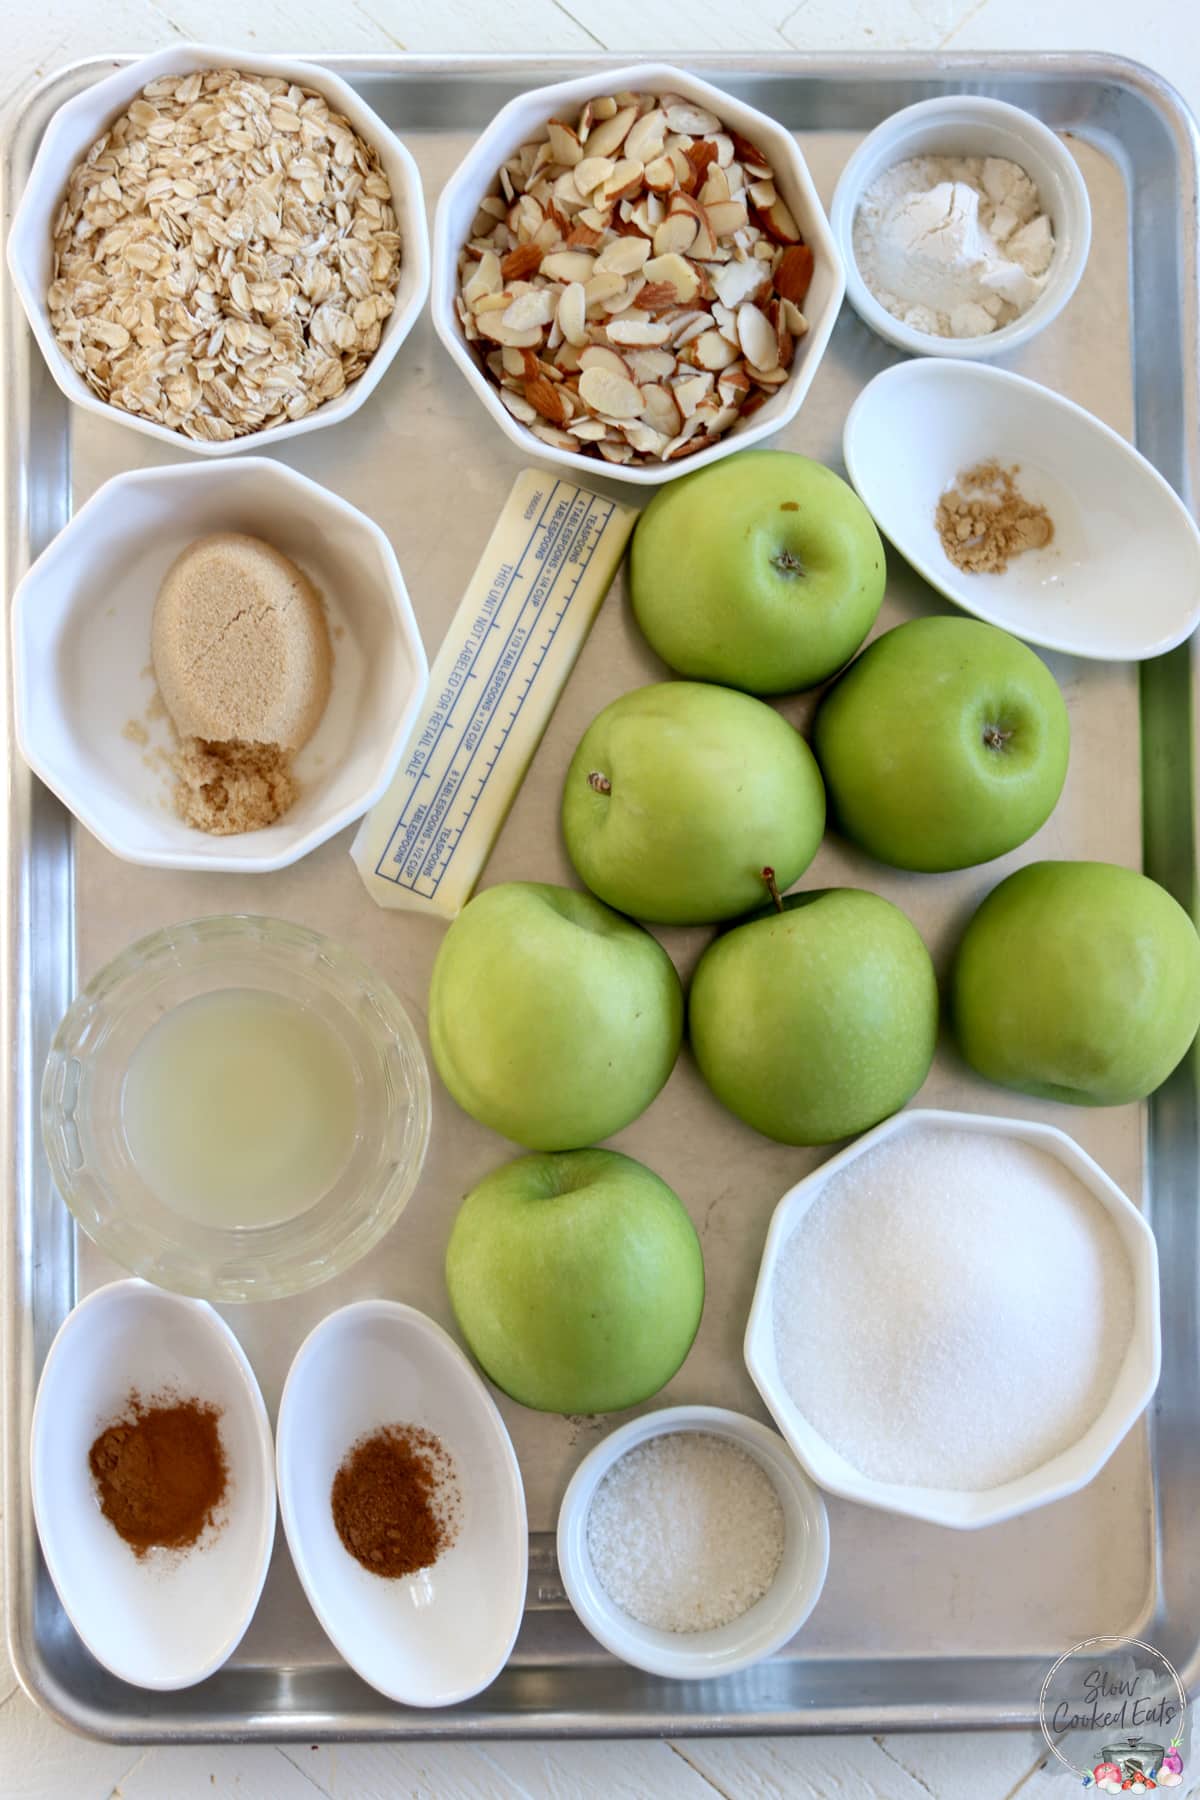 All the ingredients needed for making slow cooker apple crisp on a metal tray.